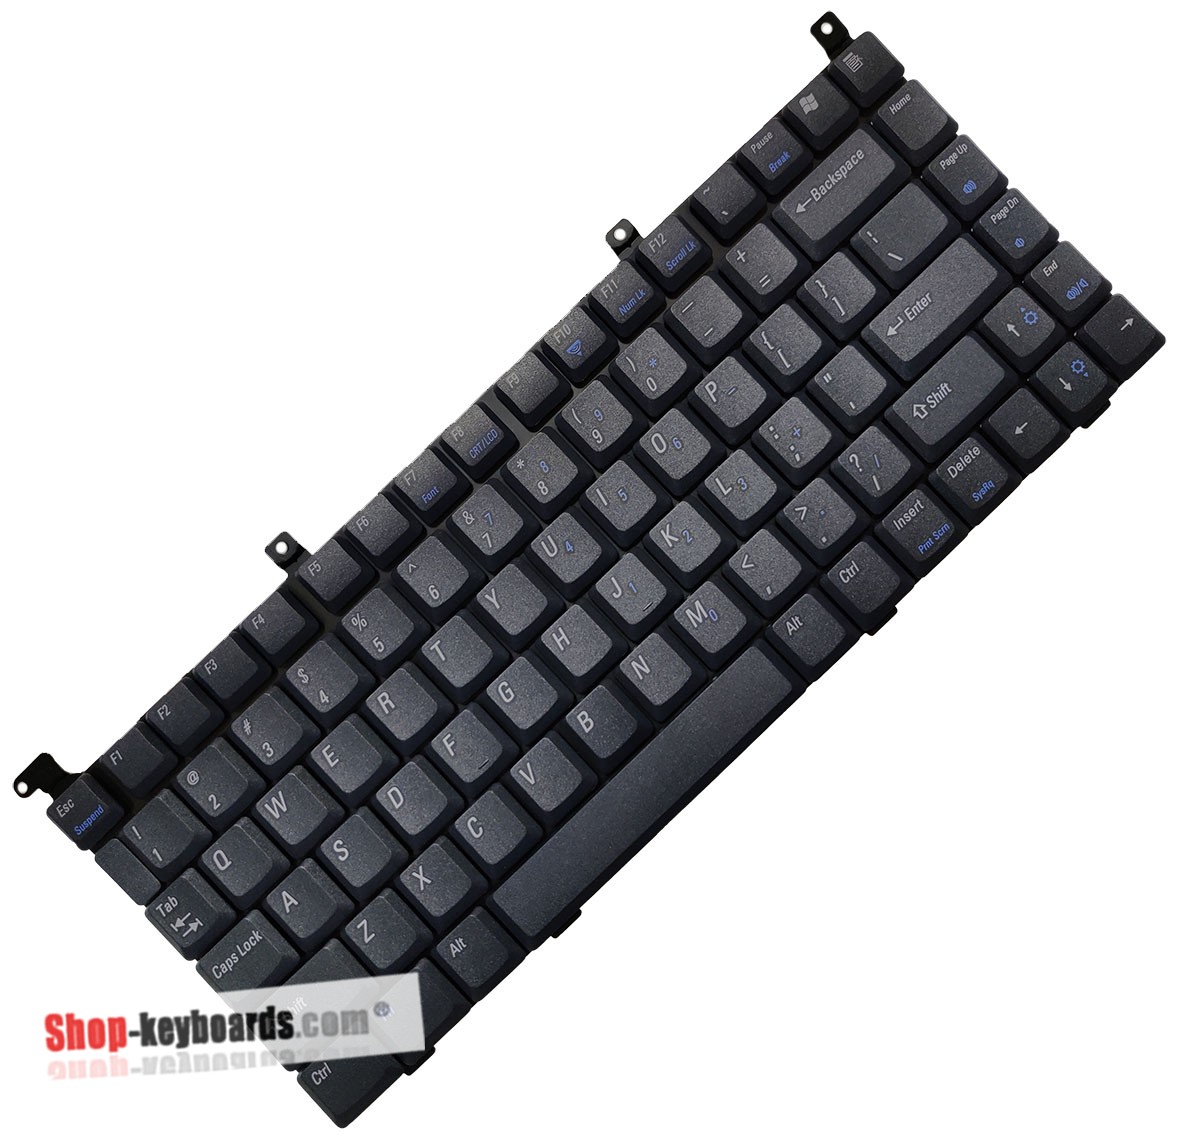 Dell Inspiron 5160 Keyboard replacement